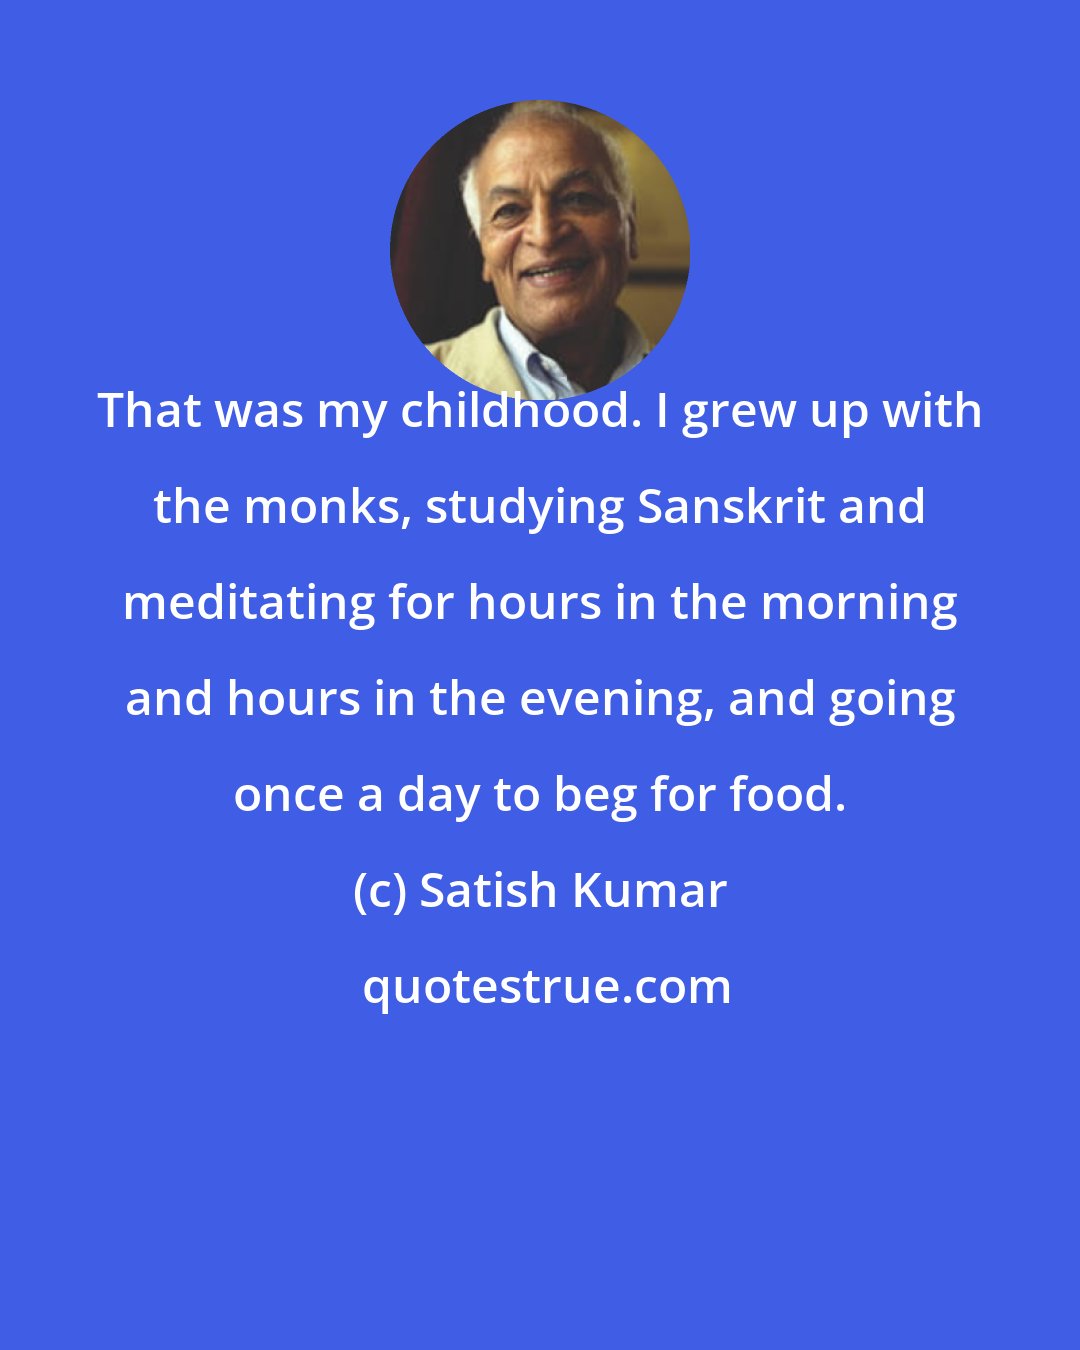 Satish Kumar: That was my childhood. I grew up with the monks, studying Sanskrit and meditating for hours in the morning and hours in the evening, and going once a day to beg for food.